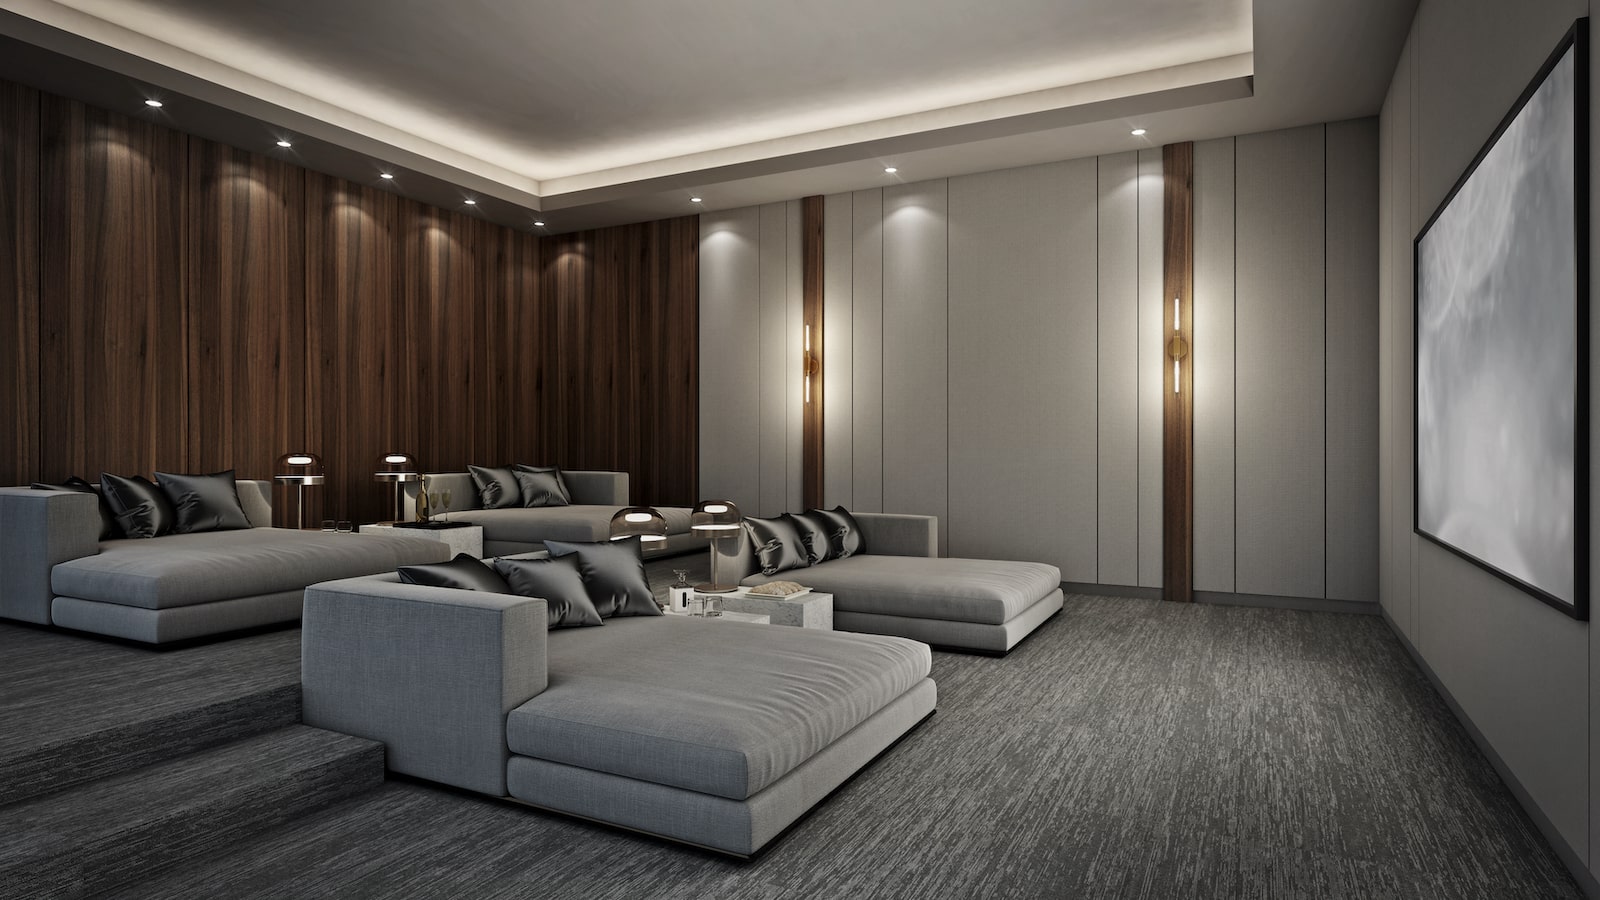 Home theater setup cost in India-Symphony 440 Design Group